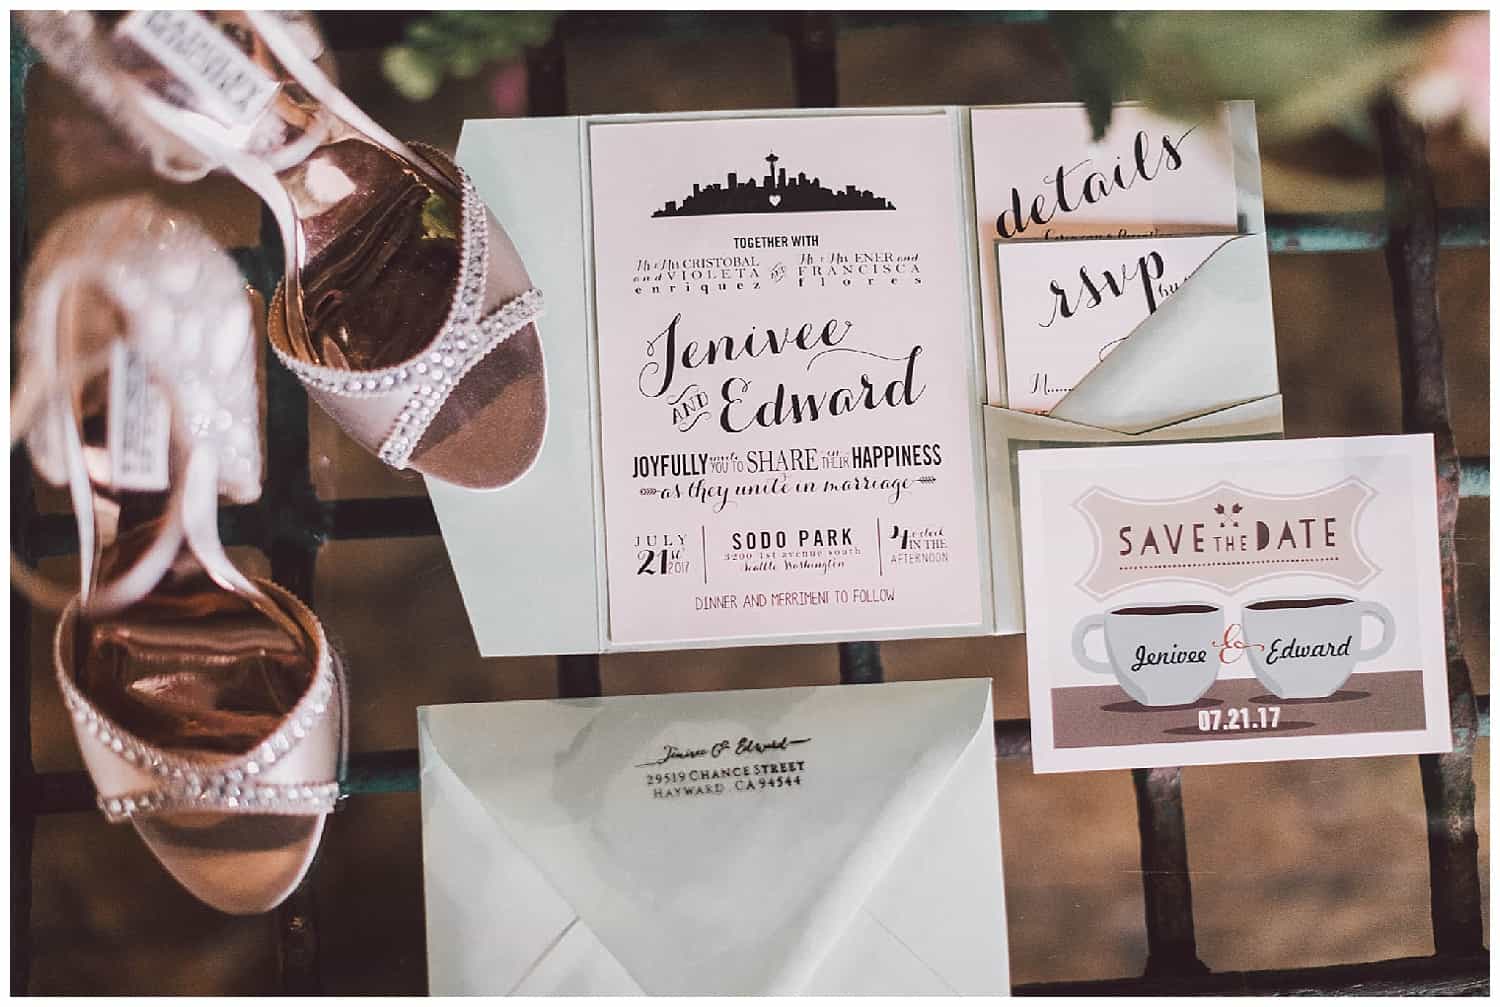 Sodo Park wedding stationary paper details at the venue by Seattle wedding photographer Kyle Goldie of Luma Weddings